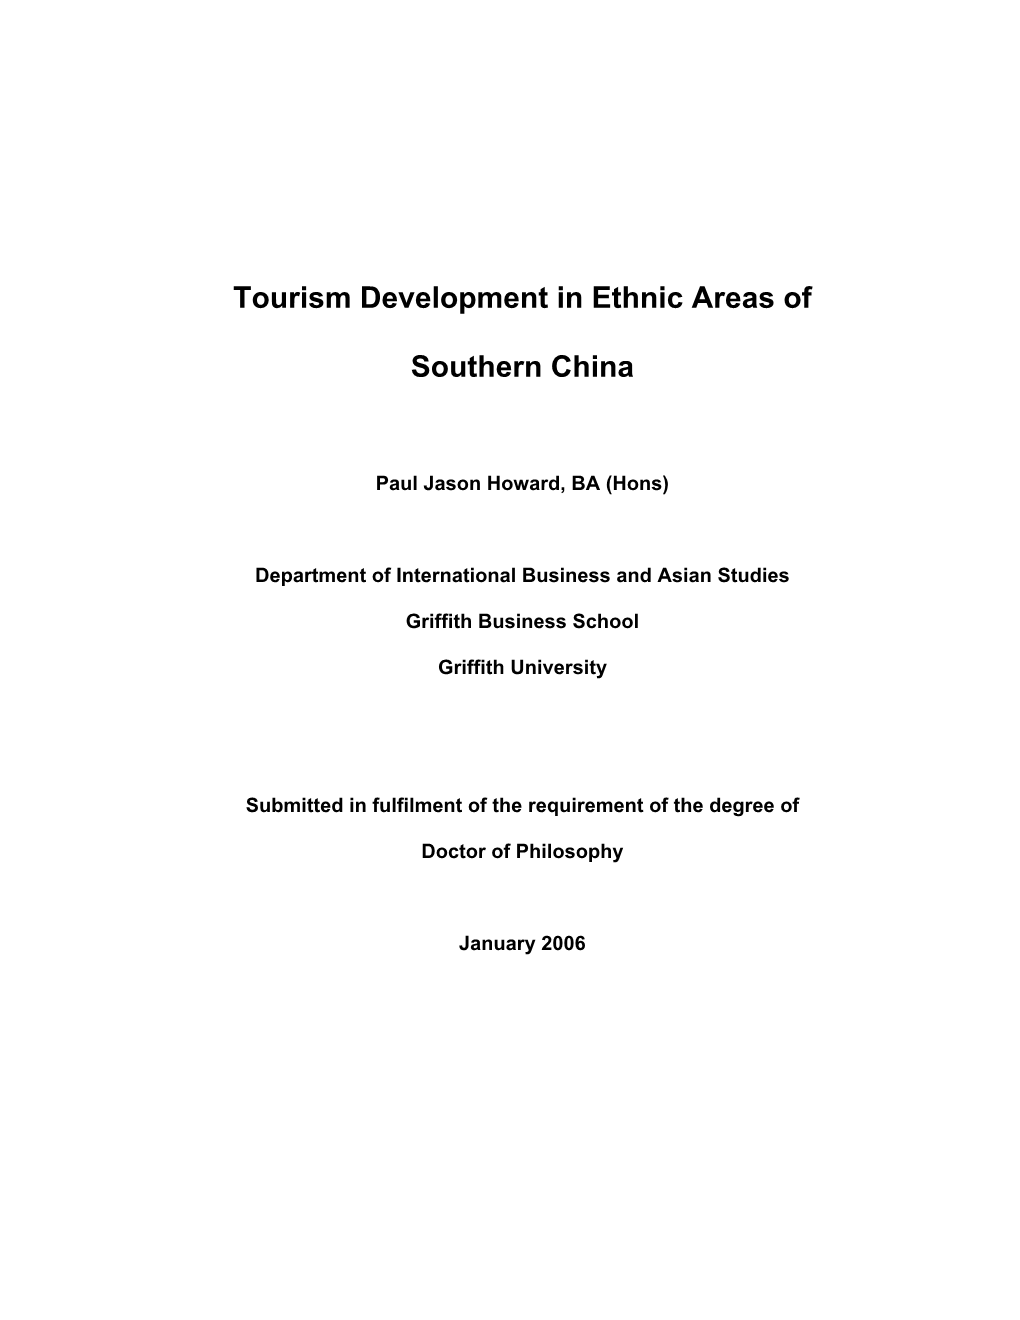 Tourism Development in Ethnic Areas of Southern China